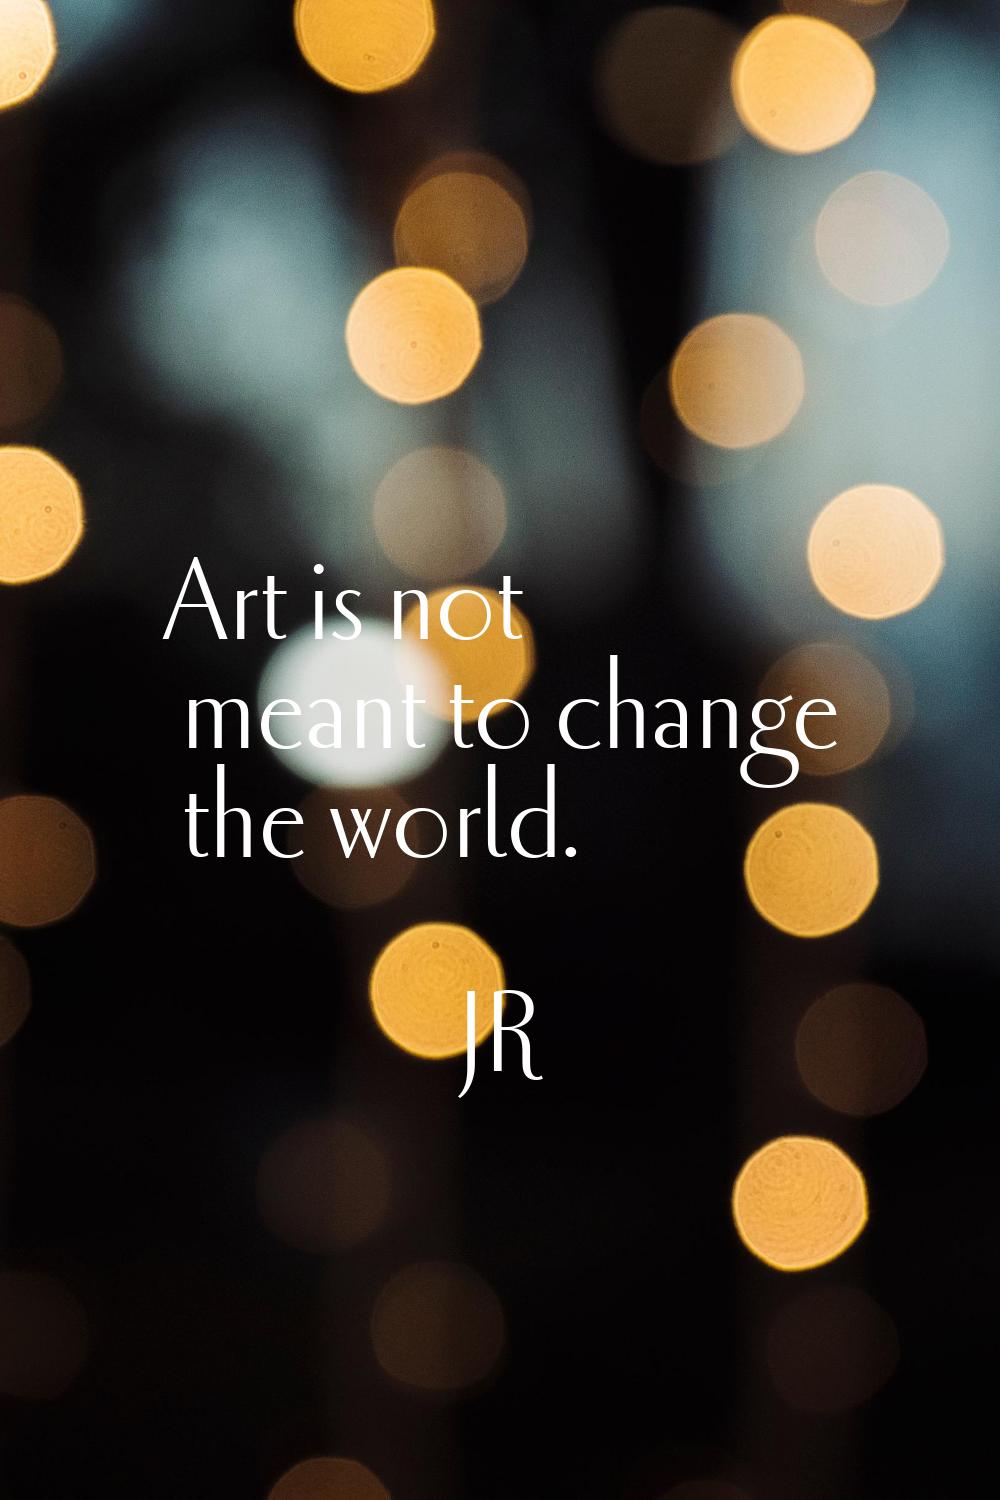 Art is not meant to change the world.